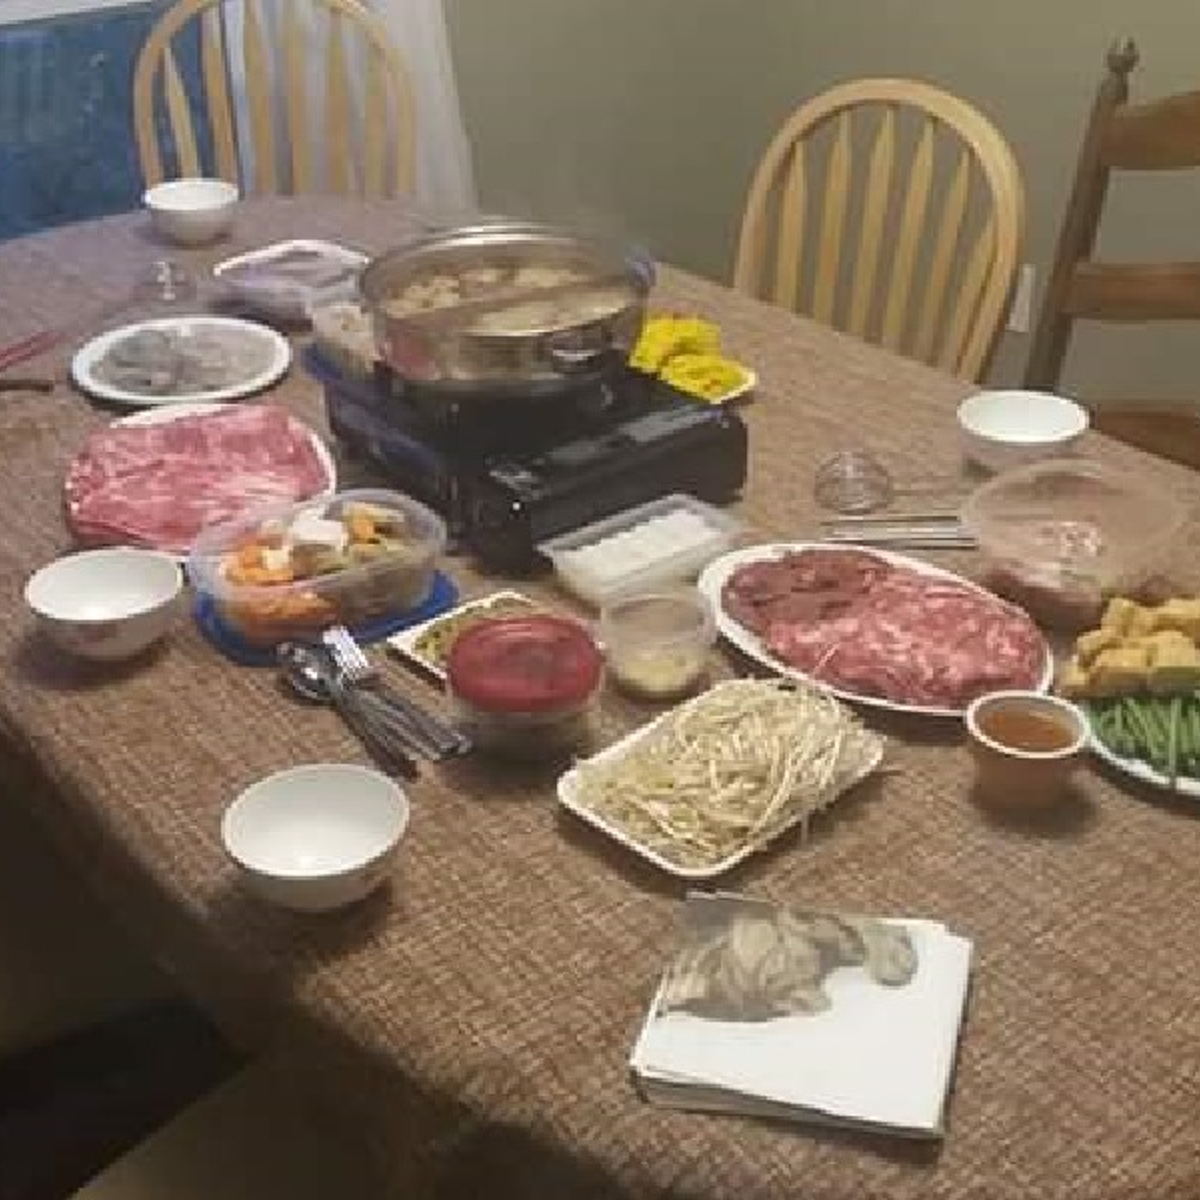 Hotpot Night in Canada, family heritage meal